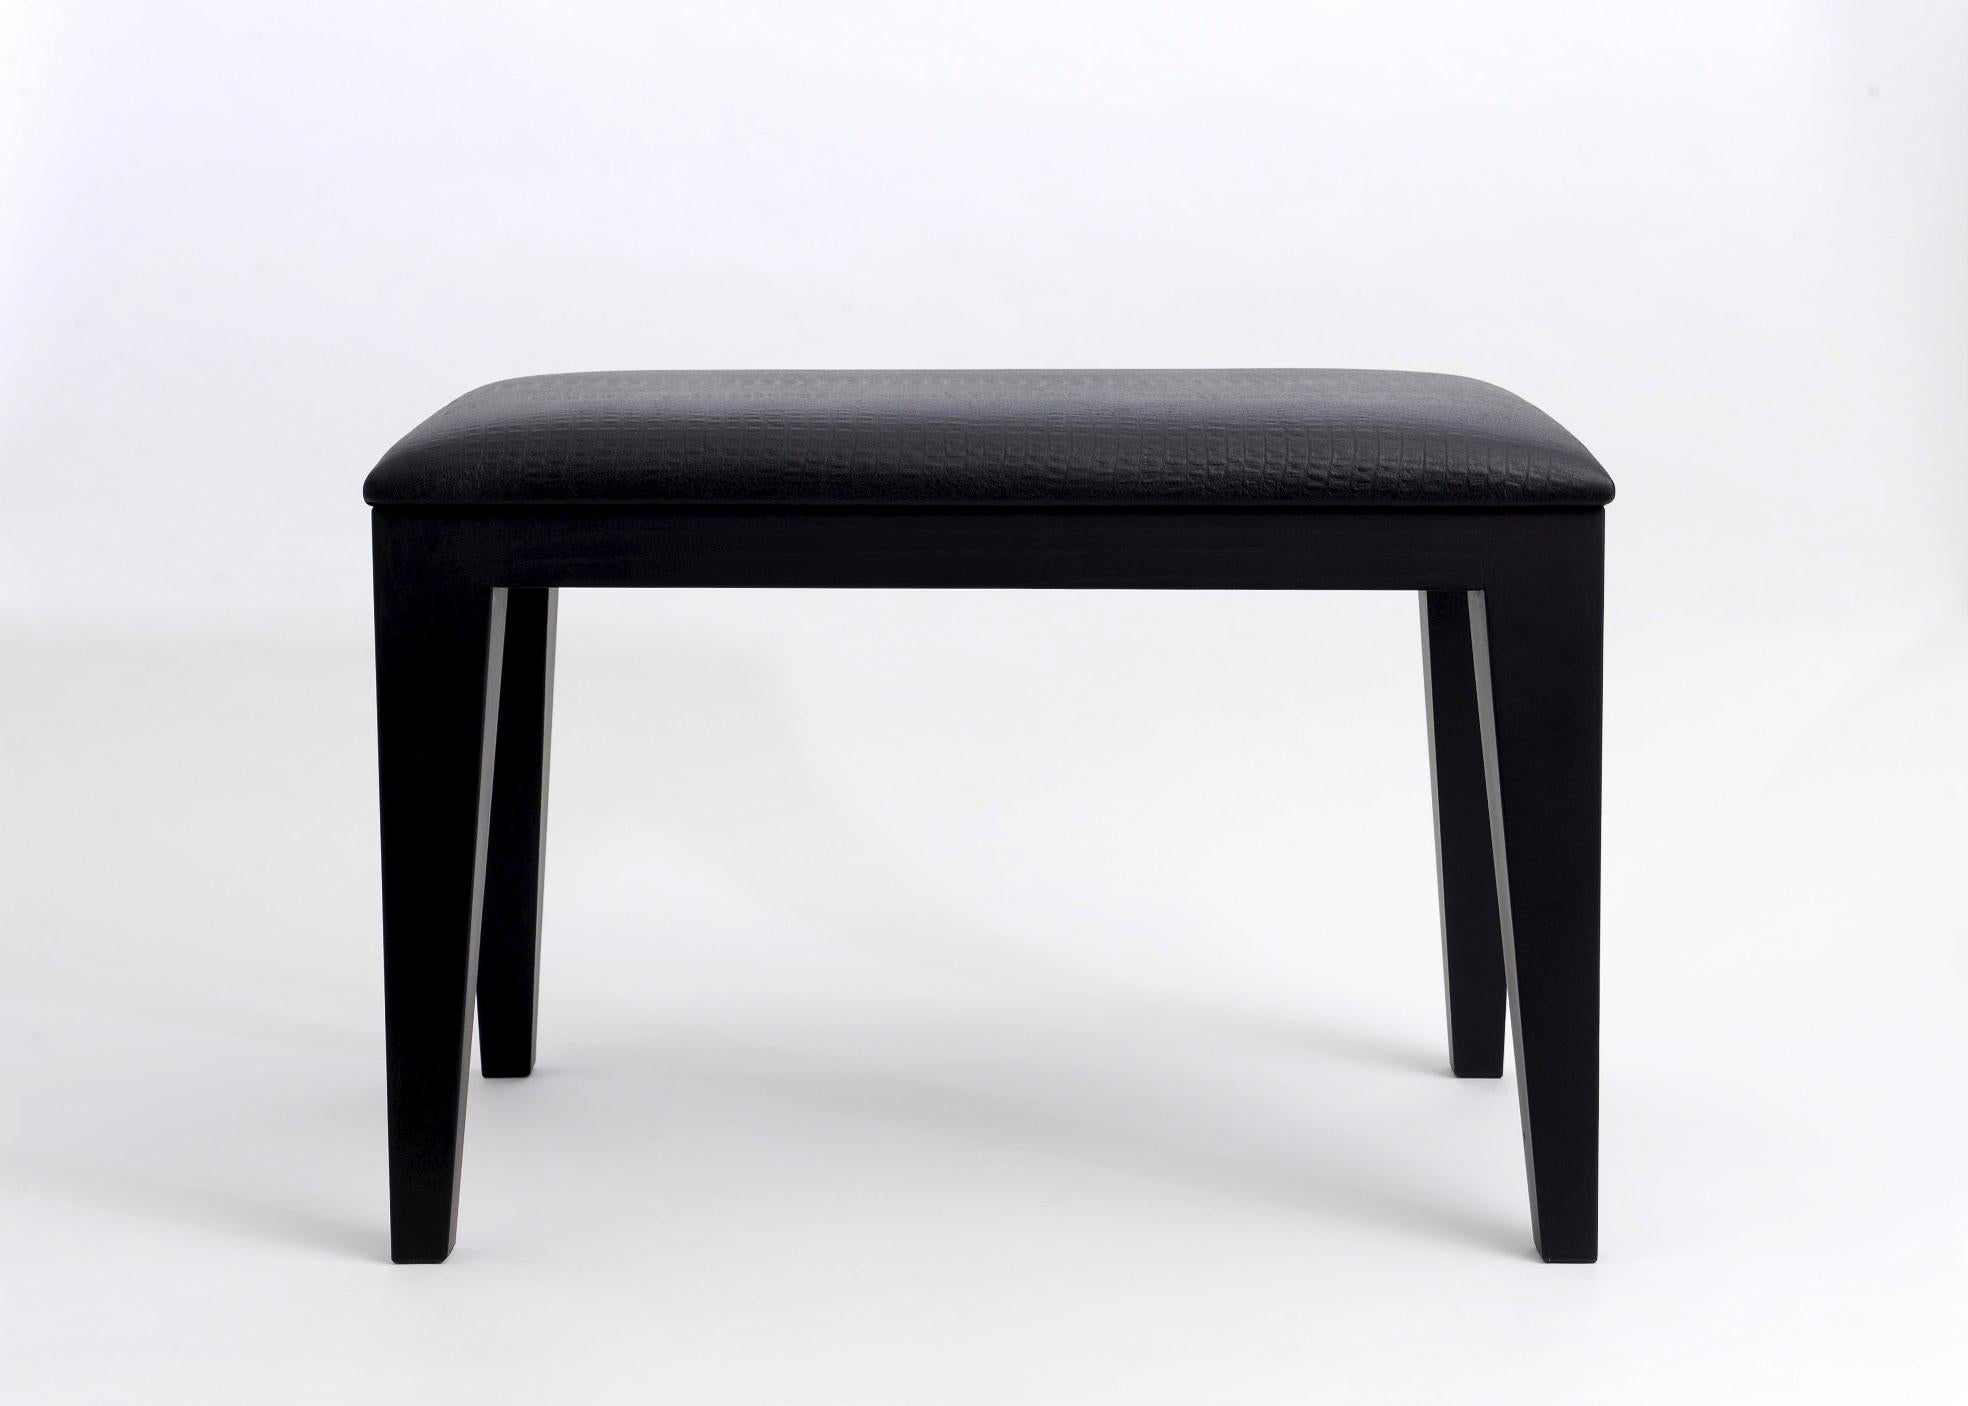 Small bench or ottoman in solid french stained black ash. Padded seat with polyurethan foam, upholstered with crocodile style embossed black cow leather.
Seat high is 41 cm so perfect to put on your shoes easily. This occasional seat can fit well as